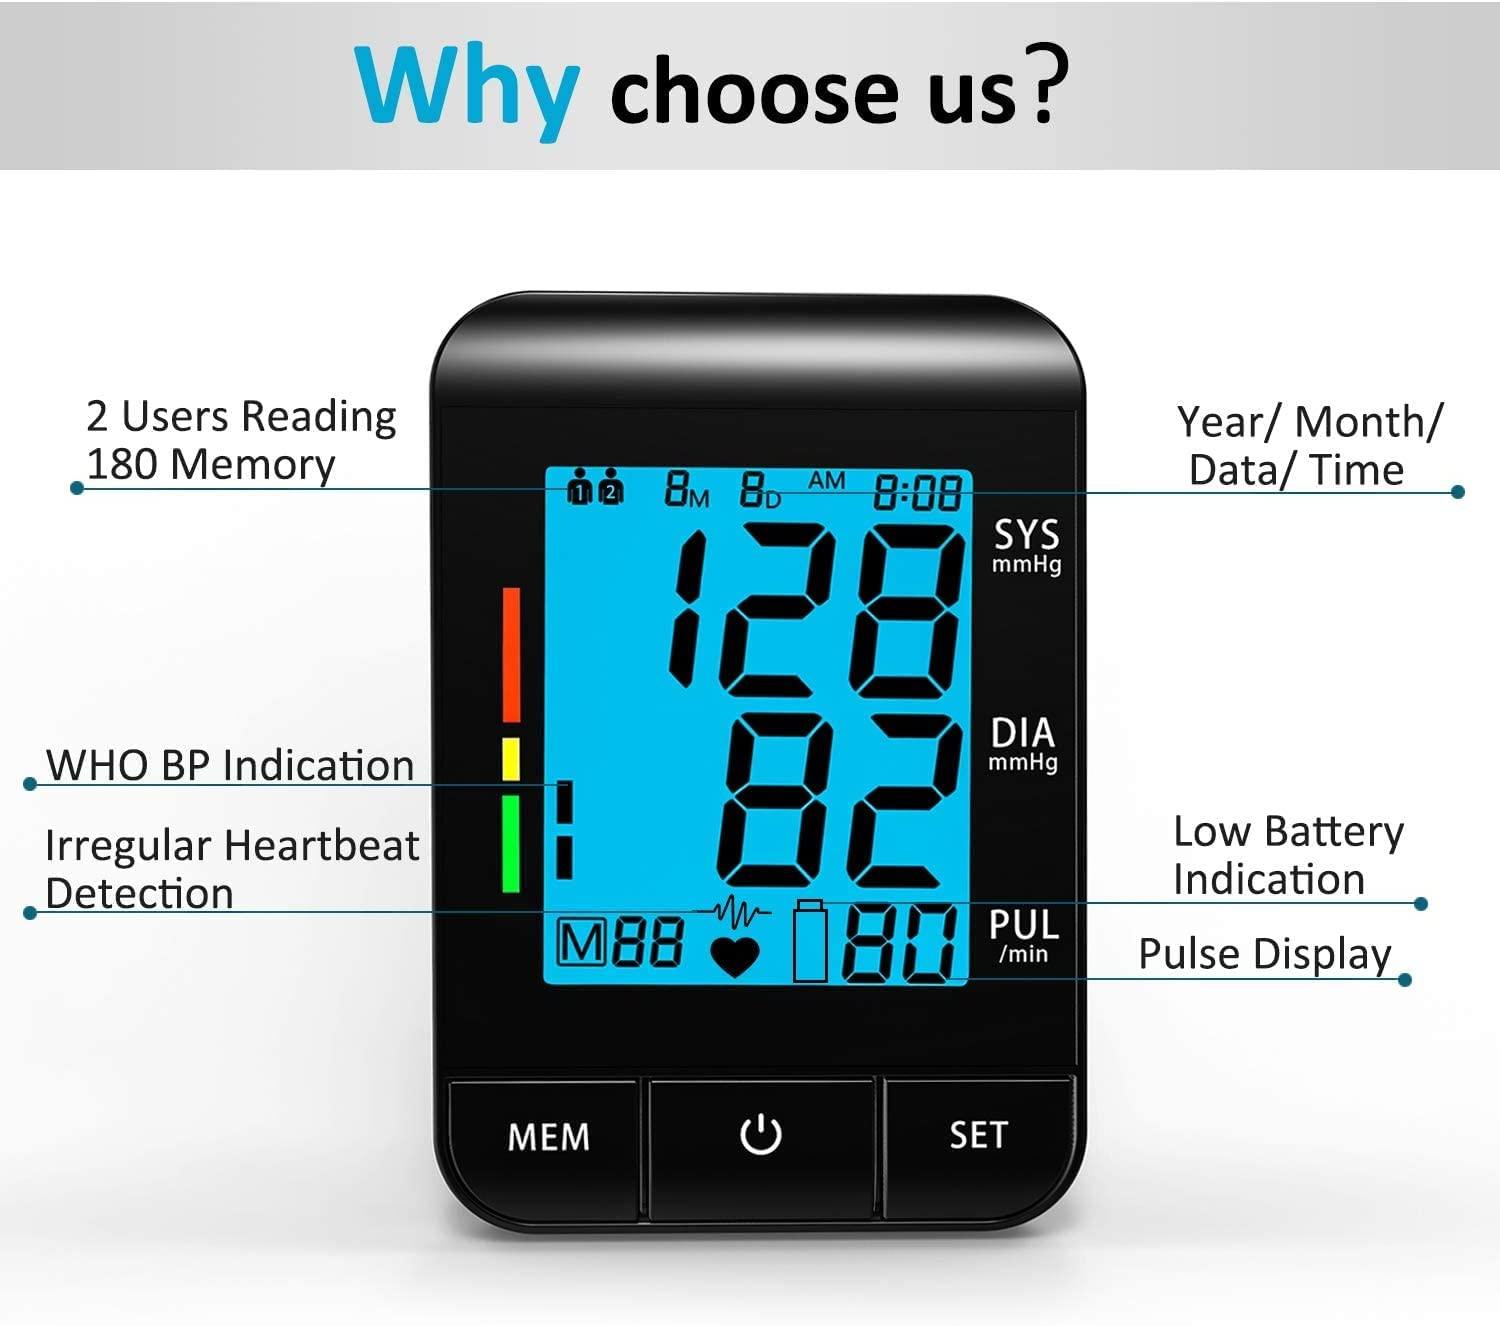 Arm Sphygmomanometer Household Electronic Intelligent Automatic Pressurized  Digital Blood Pressure Measuring Instrument Battery Usb Powered Battery Not  Included, Free Shipping For New Users